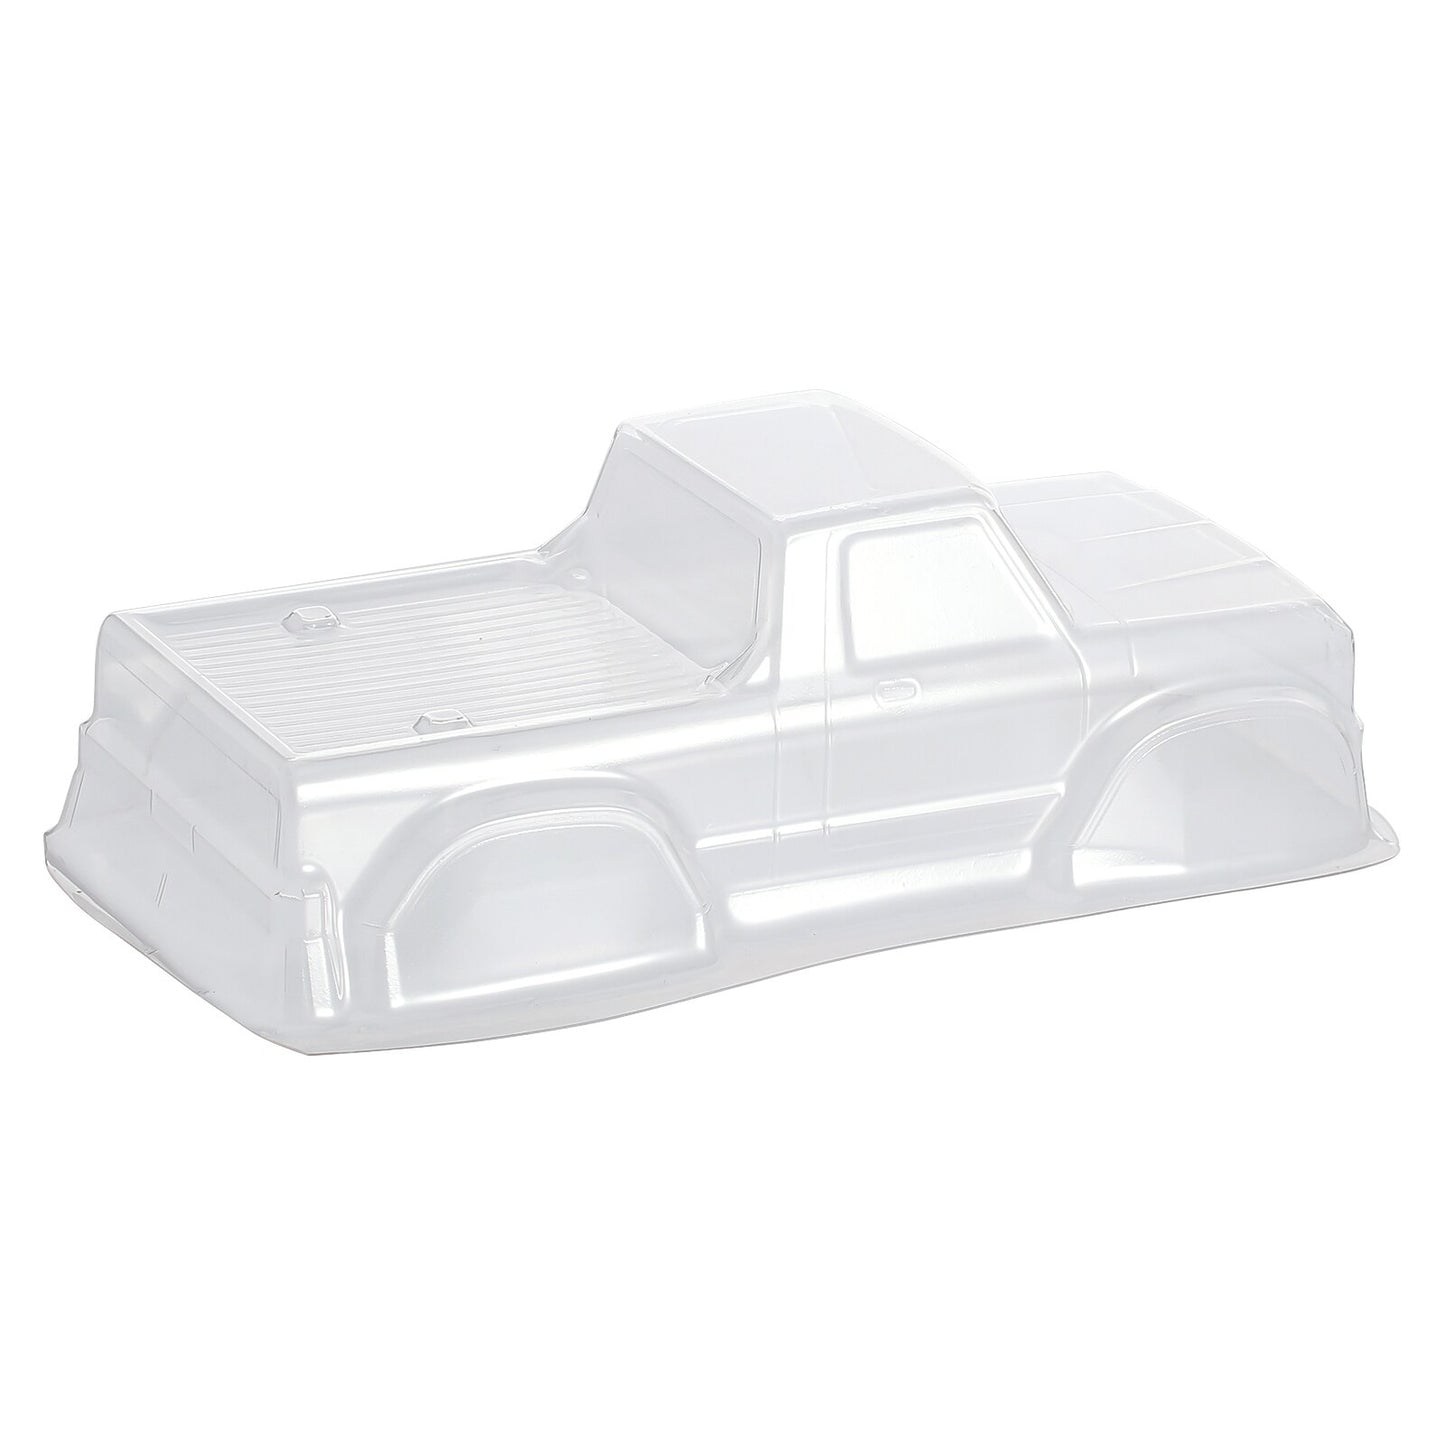 INJORA F150 Clear Body Shell with Roll Cage